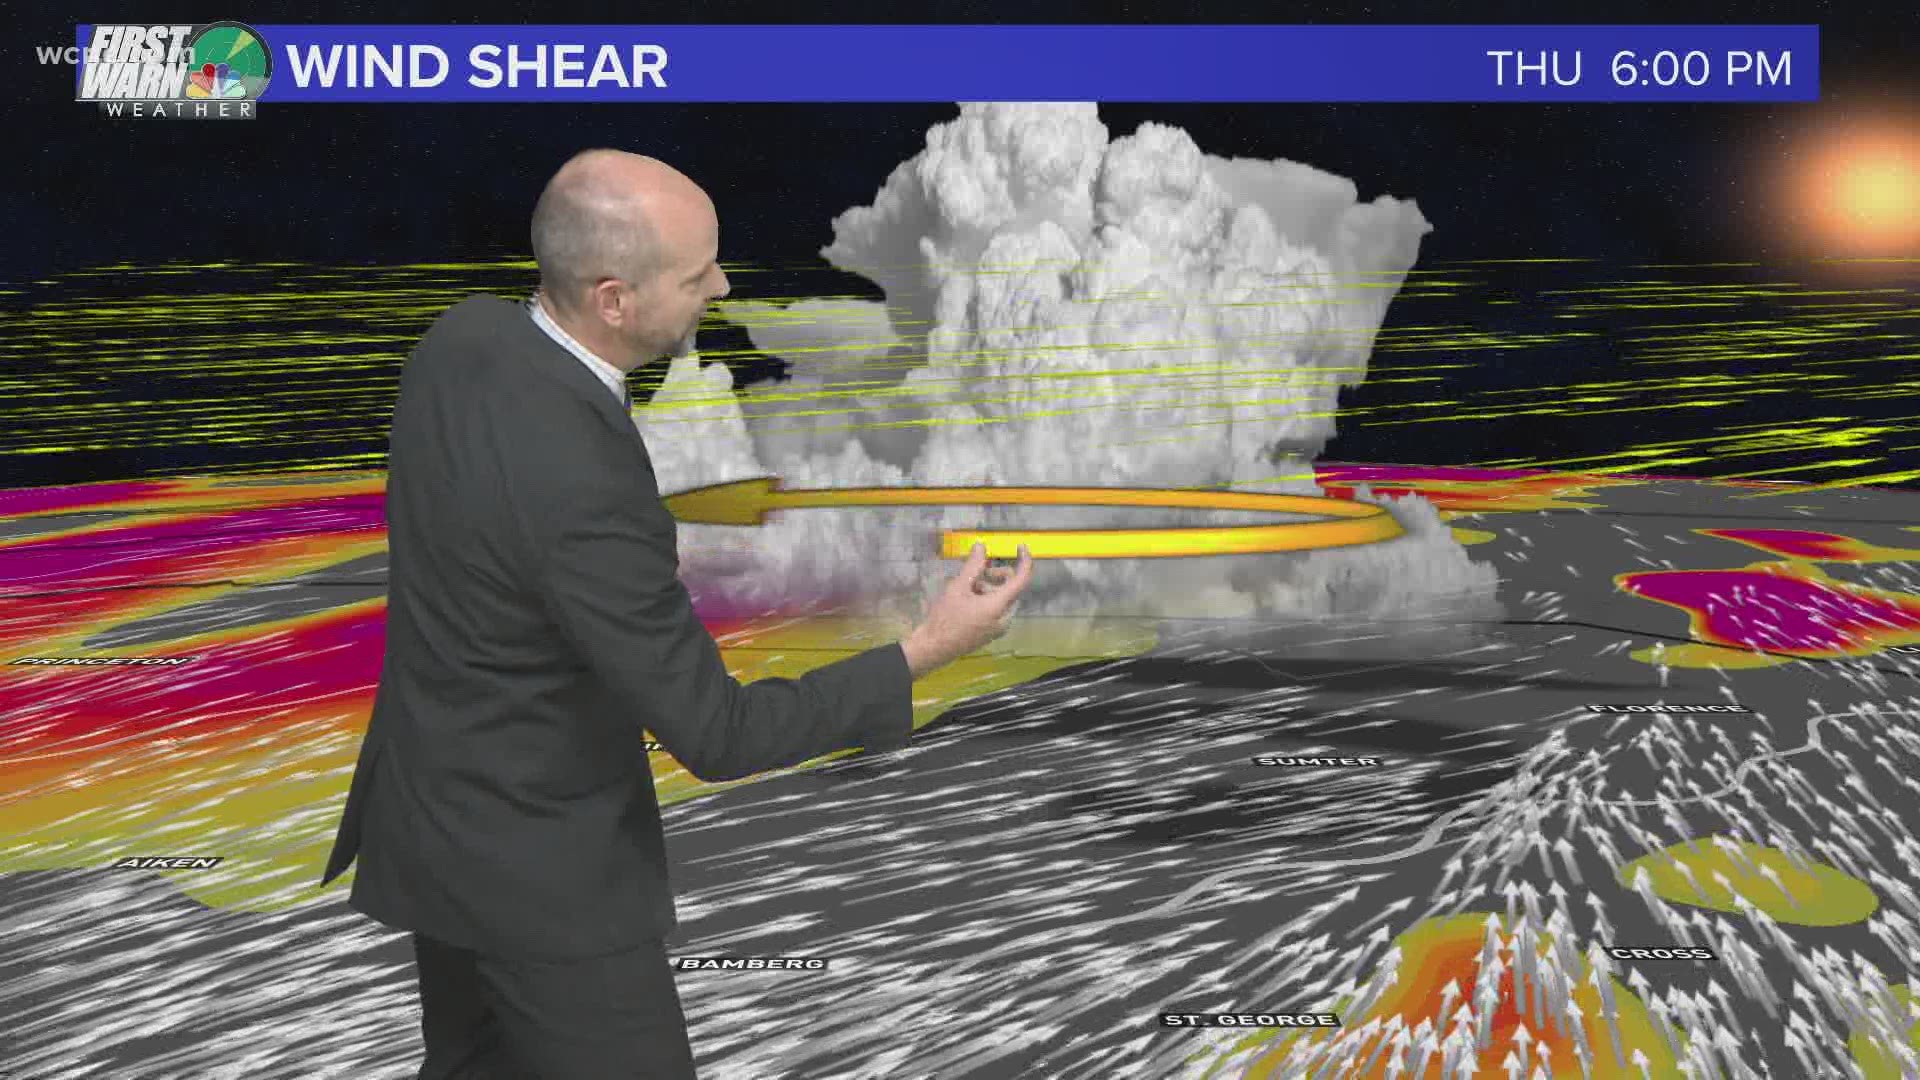 Damaging wind shear from severe thunderstorms can produce damage threatening life and property. Brad Panovich explains the science.